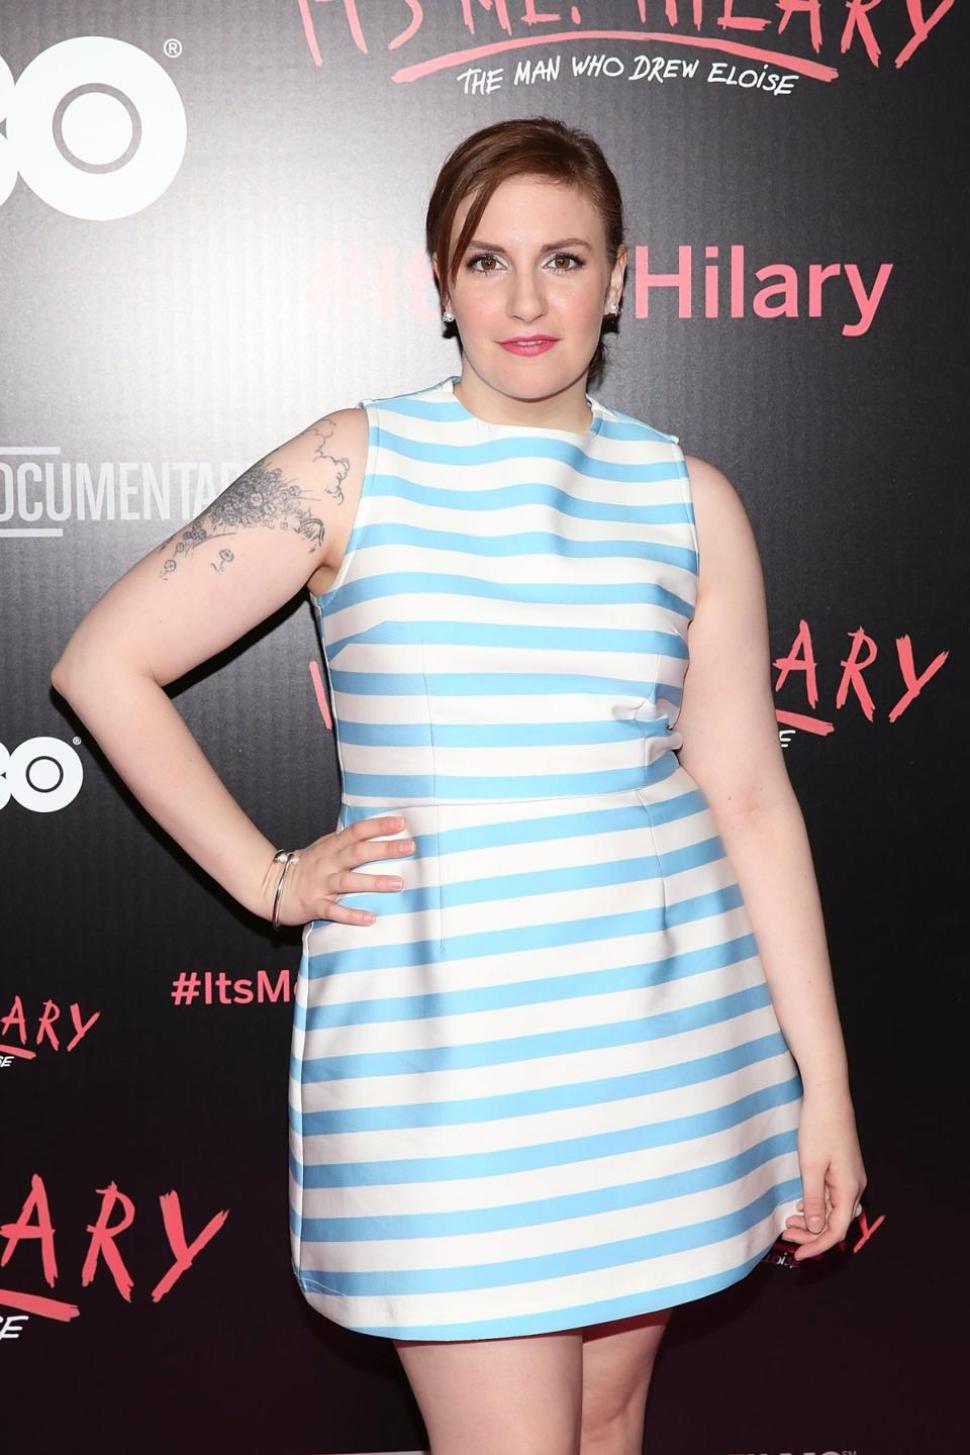 Lena Dunham loves the “Eloise” books so much she keeps the character with her always, in a tattoo on her back.